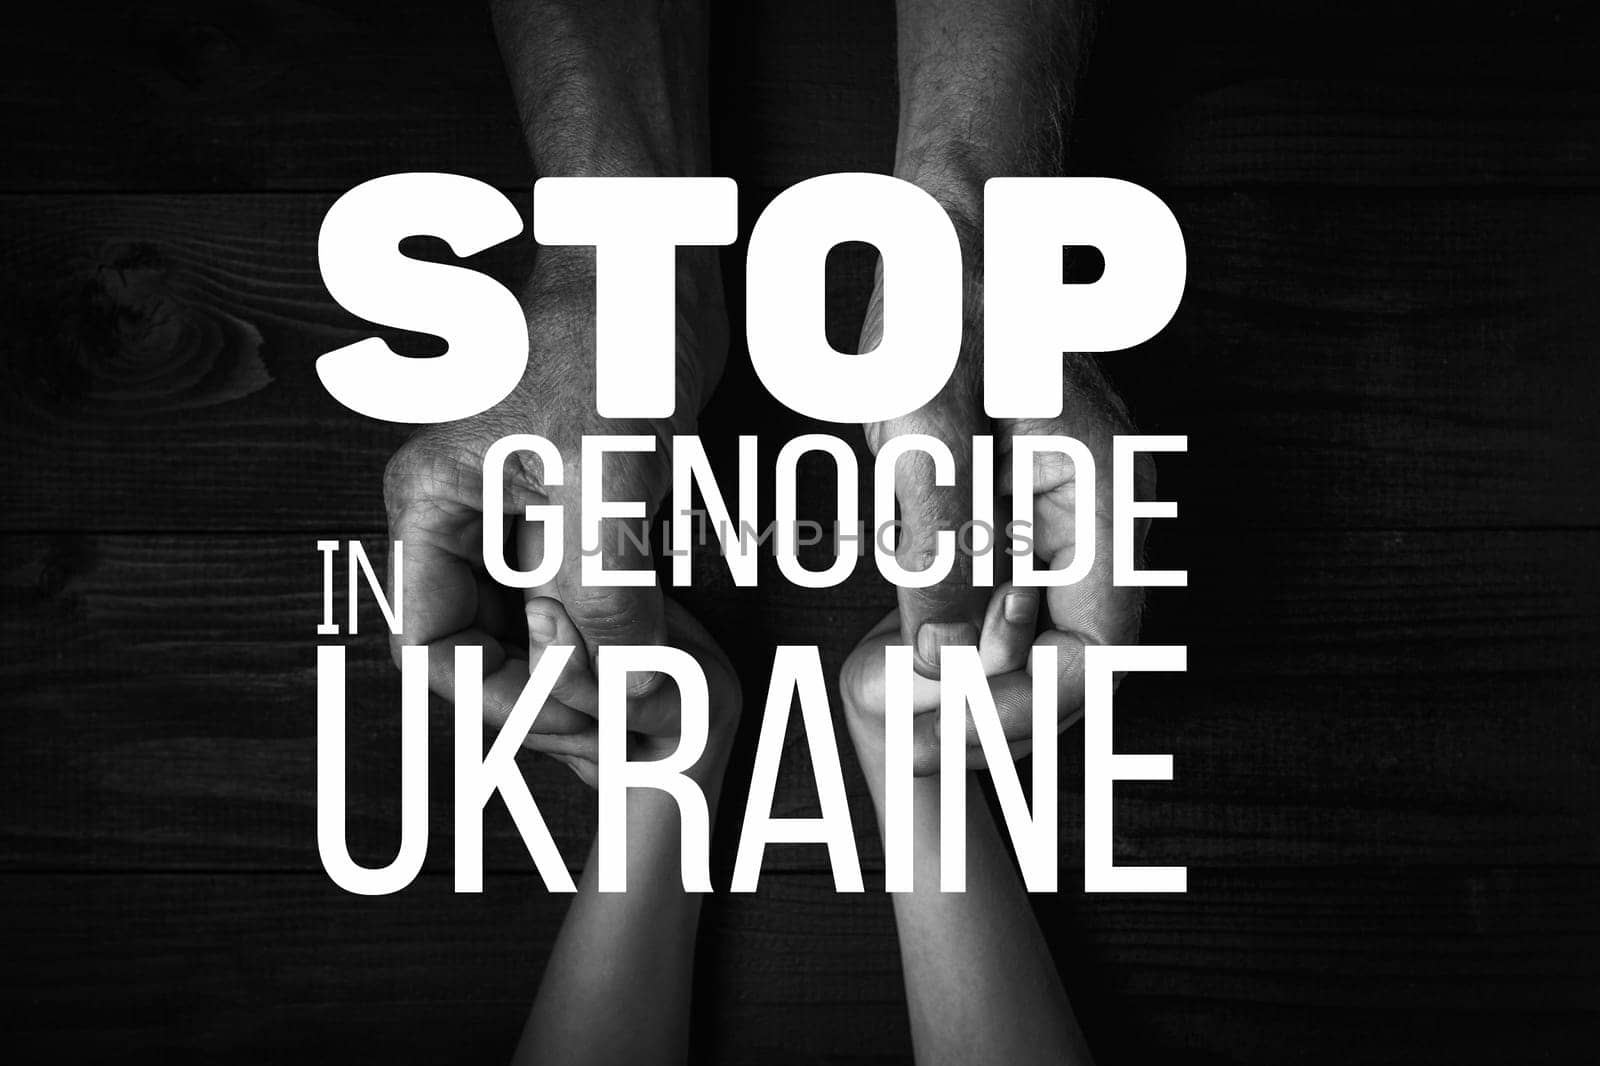 words stop genocide in ukraine against the background of childrens hands holding each other. black and white color. concept needs help and support, truth will win